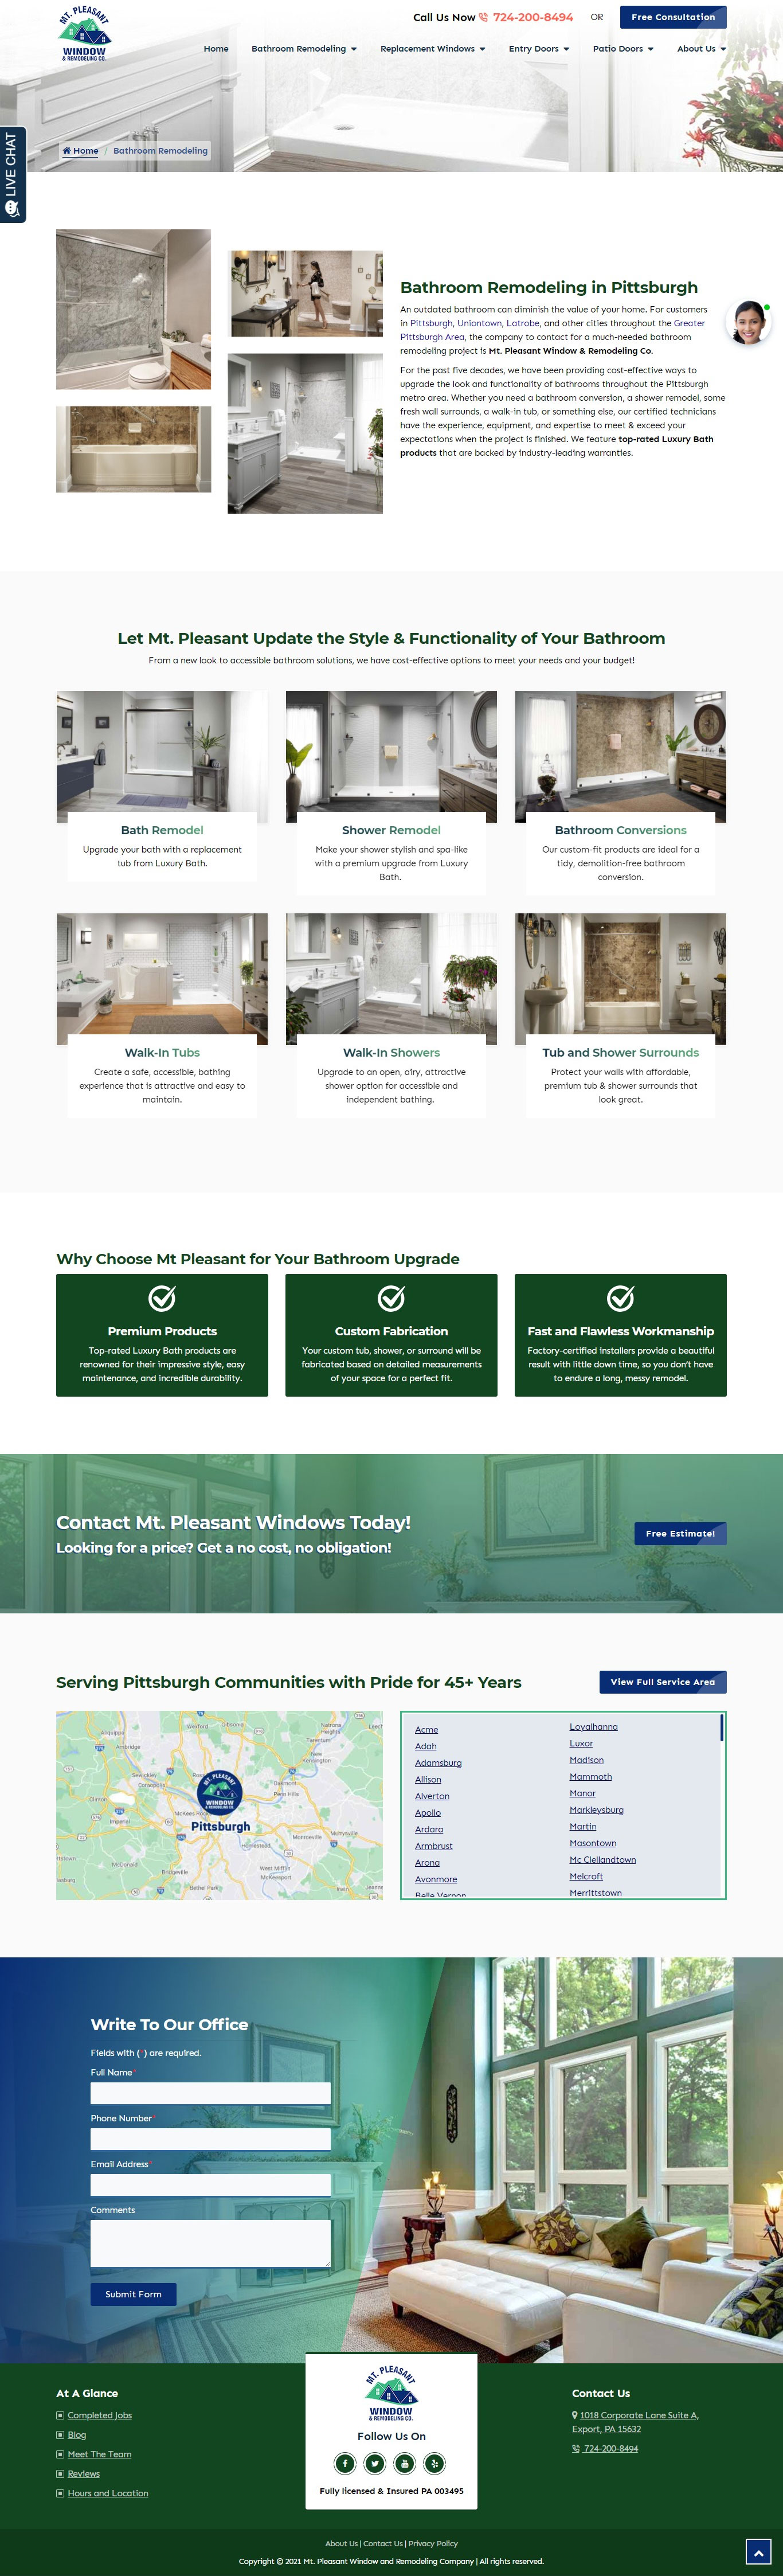 New Site Bathroom Remodeling Page